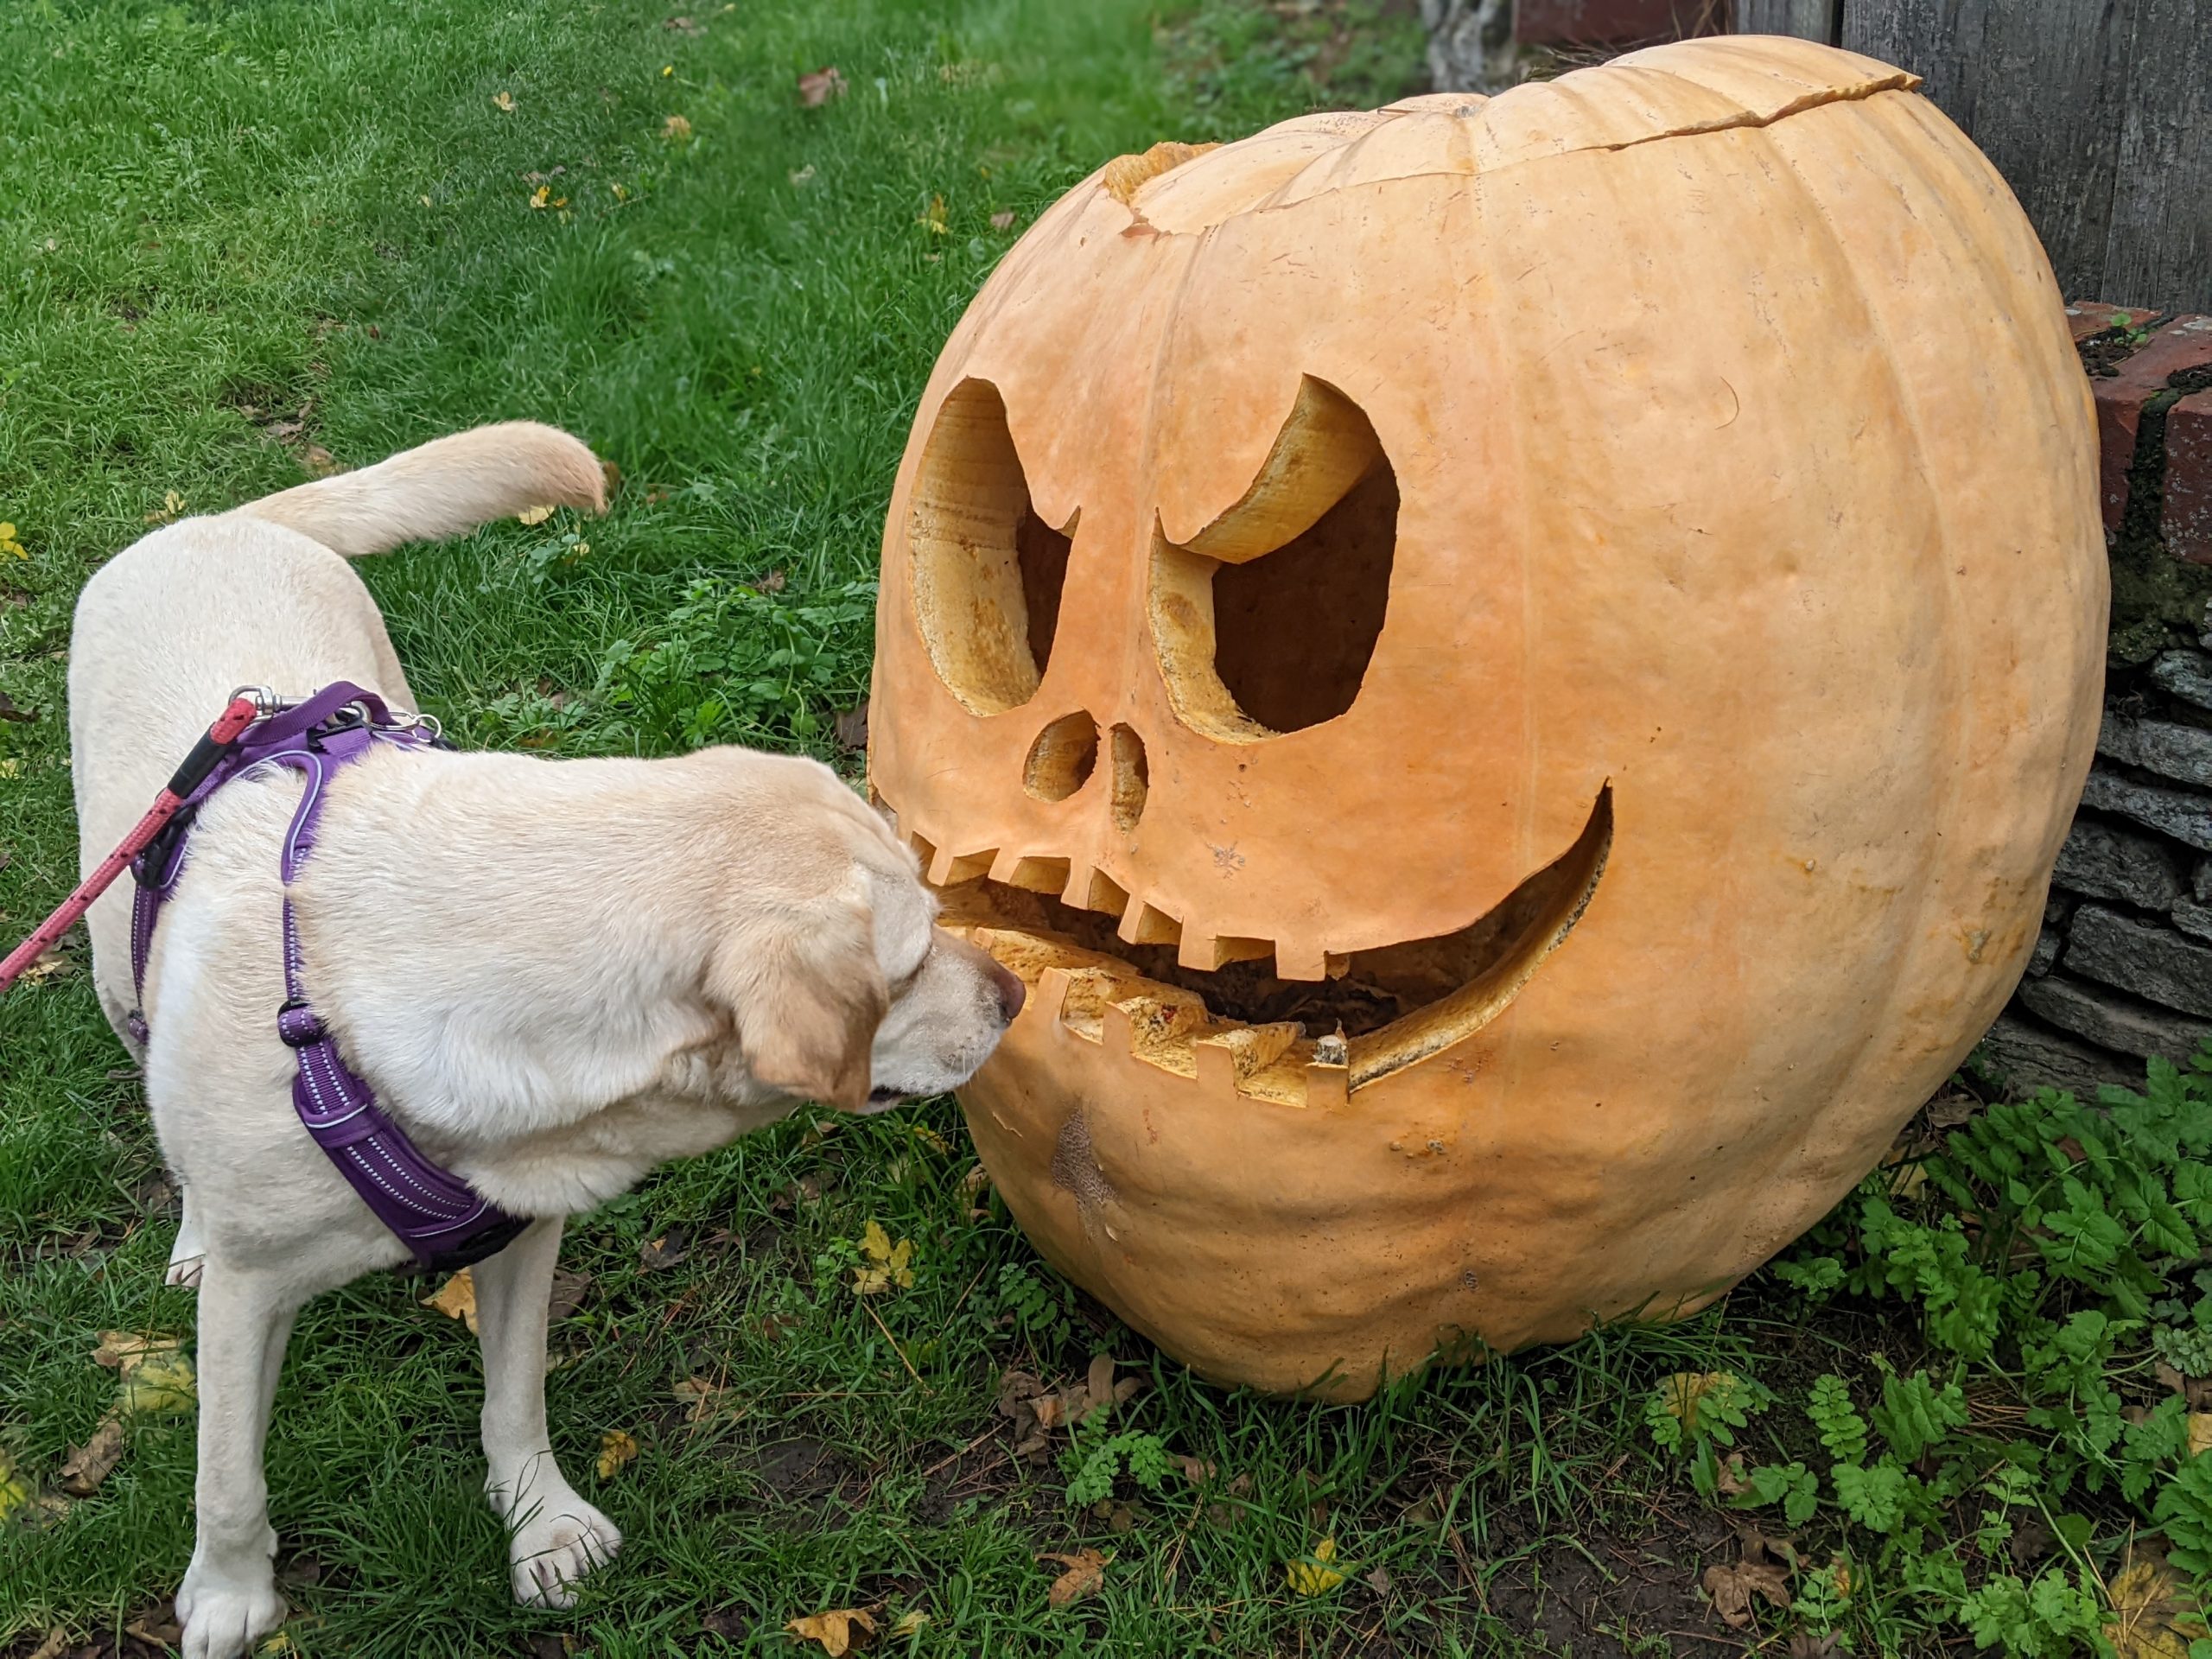 Labrador dog sniffing pumpkin that's twice the size of her